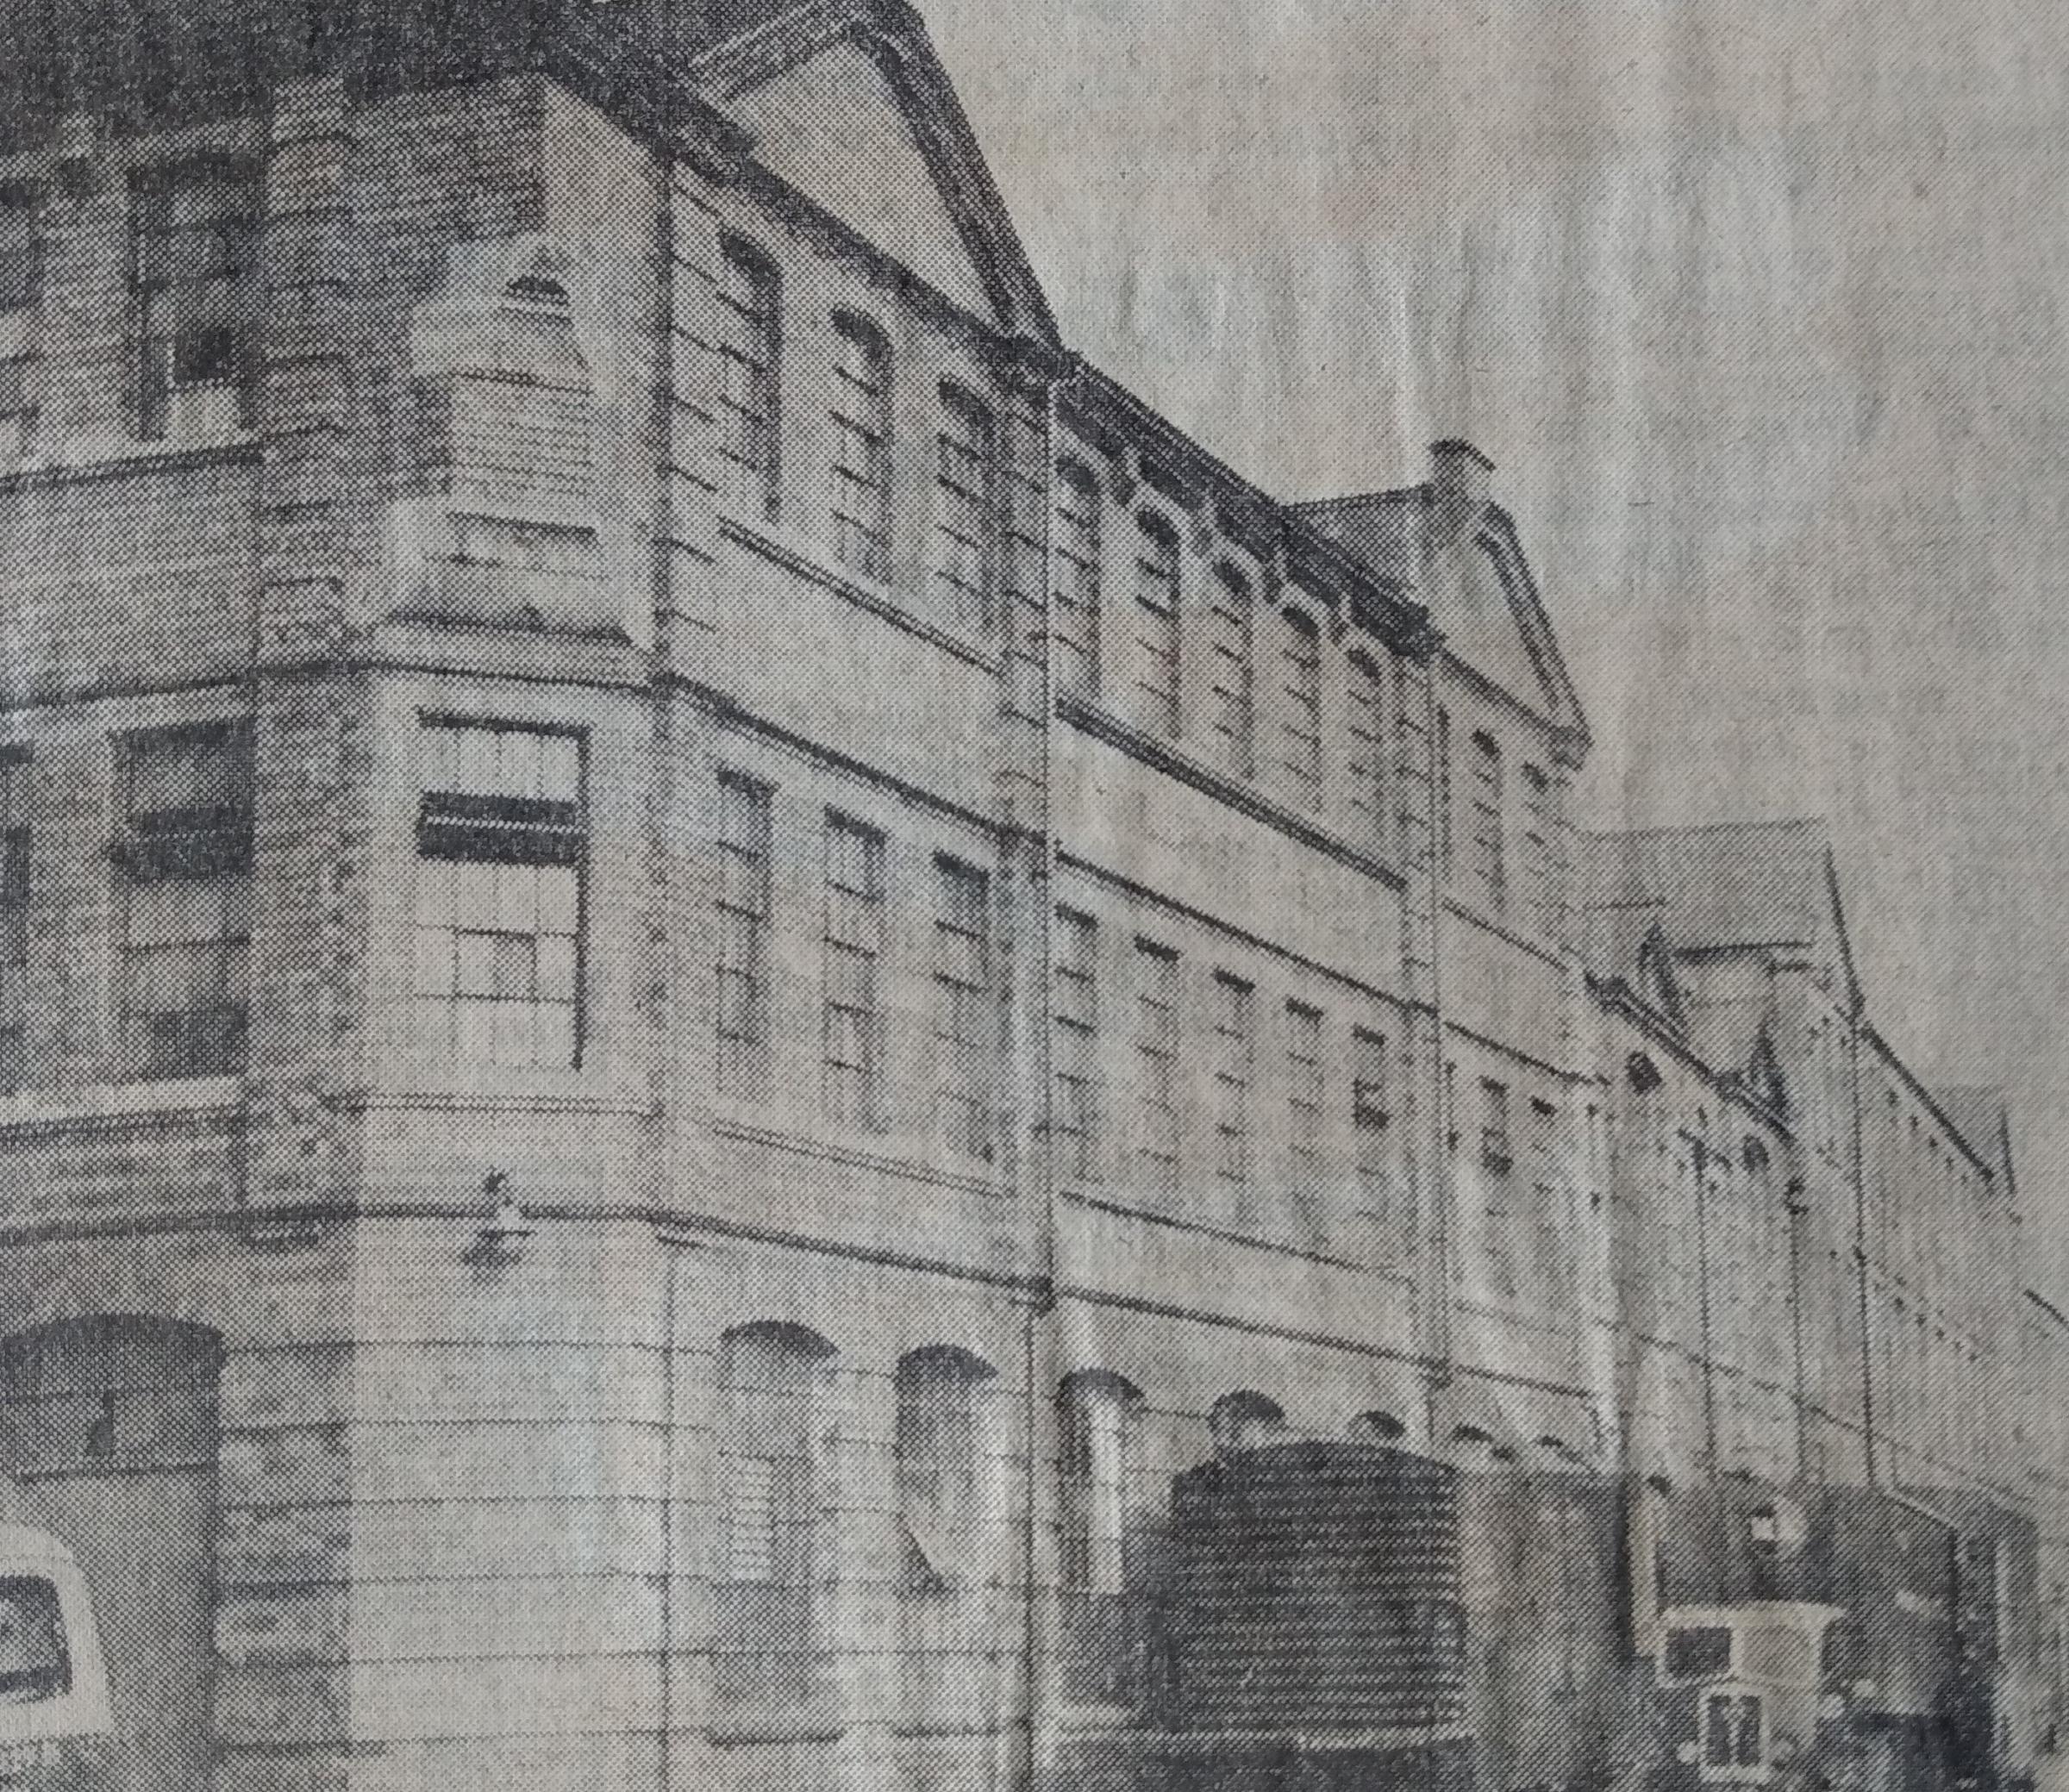 July 1967 and the Providence Works in Blockhouse were bought by the GPO to be pulled down to make way for a new telephone exchange